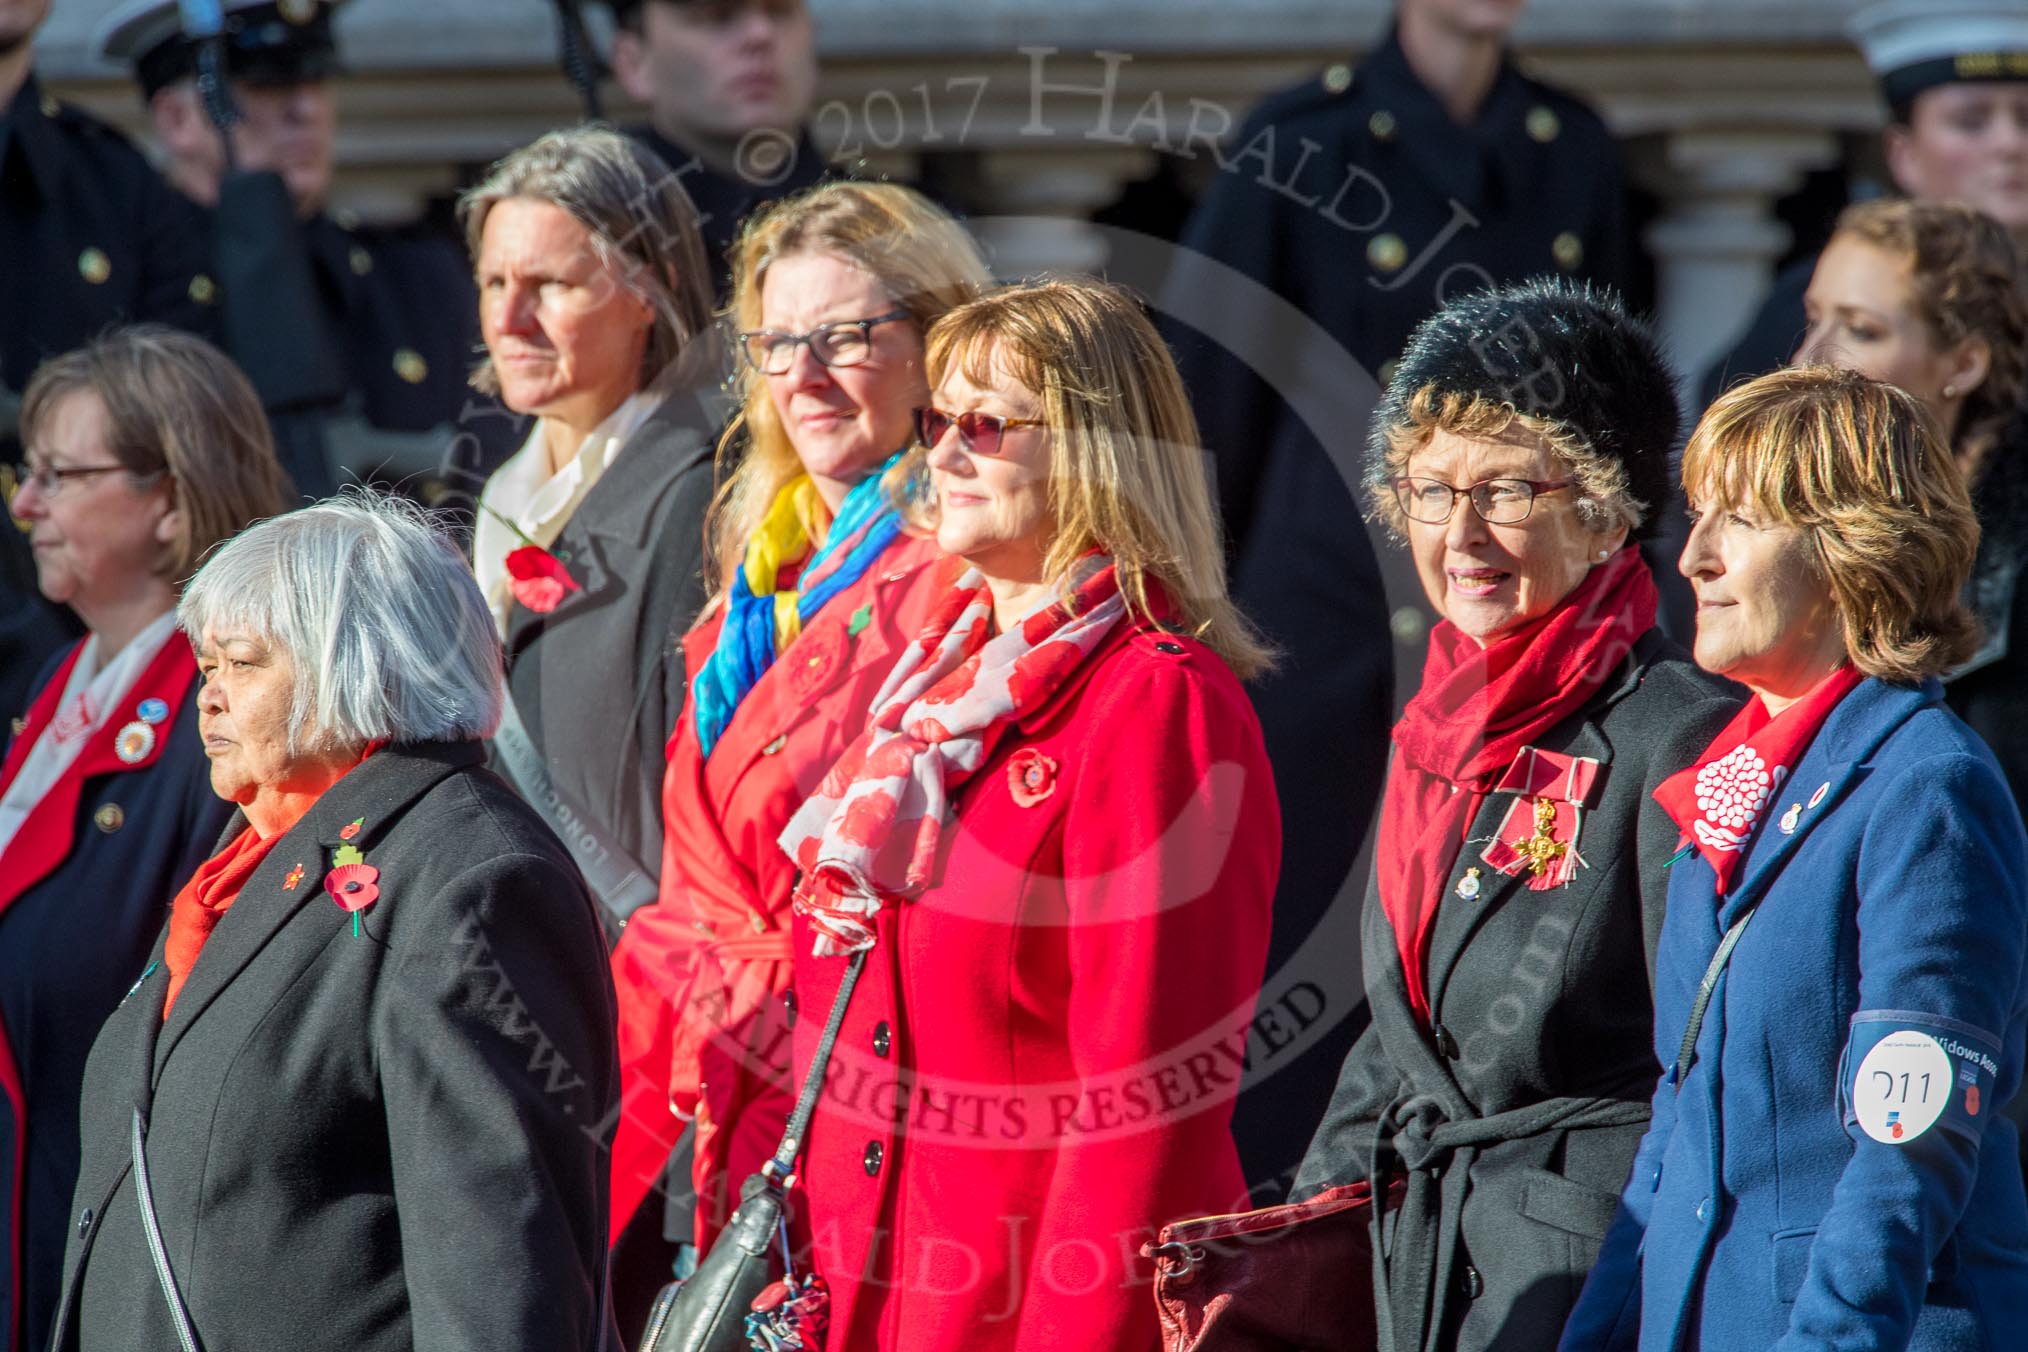 RAF Widows Association   (Group D11, 11 members) during the Royal British Legion March Past on Remembrance Sunday at the Cenotaph, Whitehall, Westminster, London, 11 November 2018, 12:21.